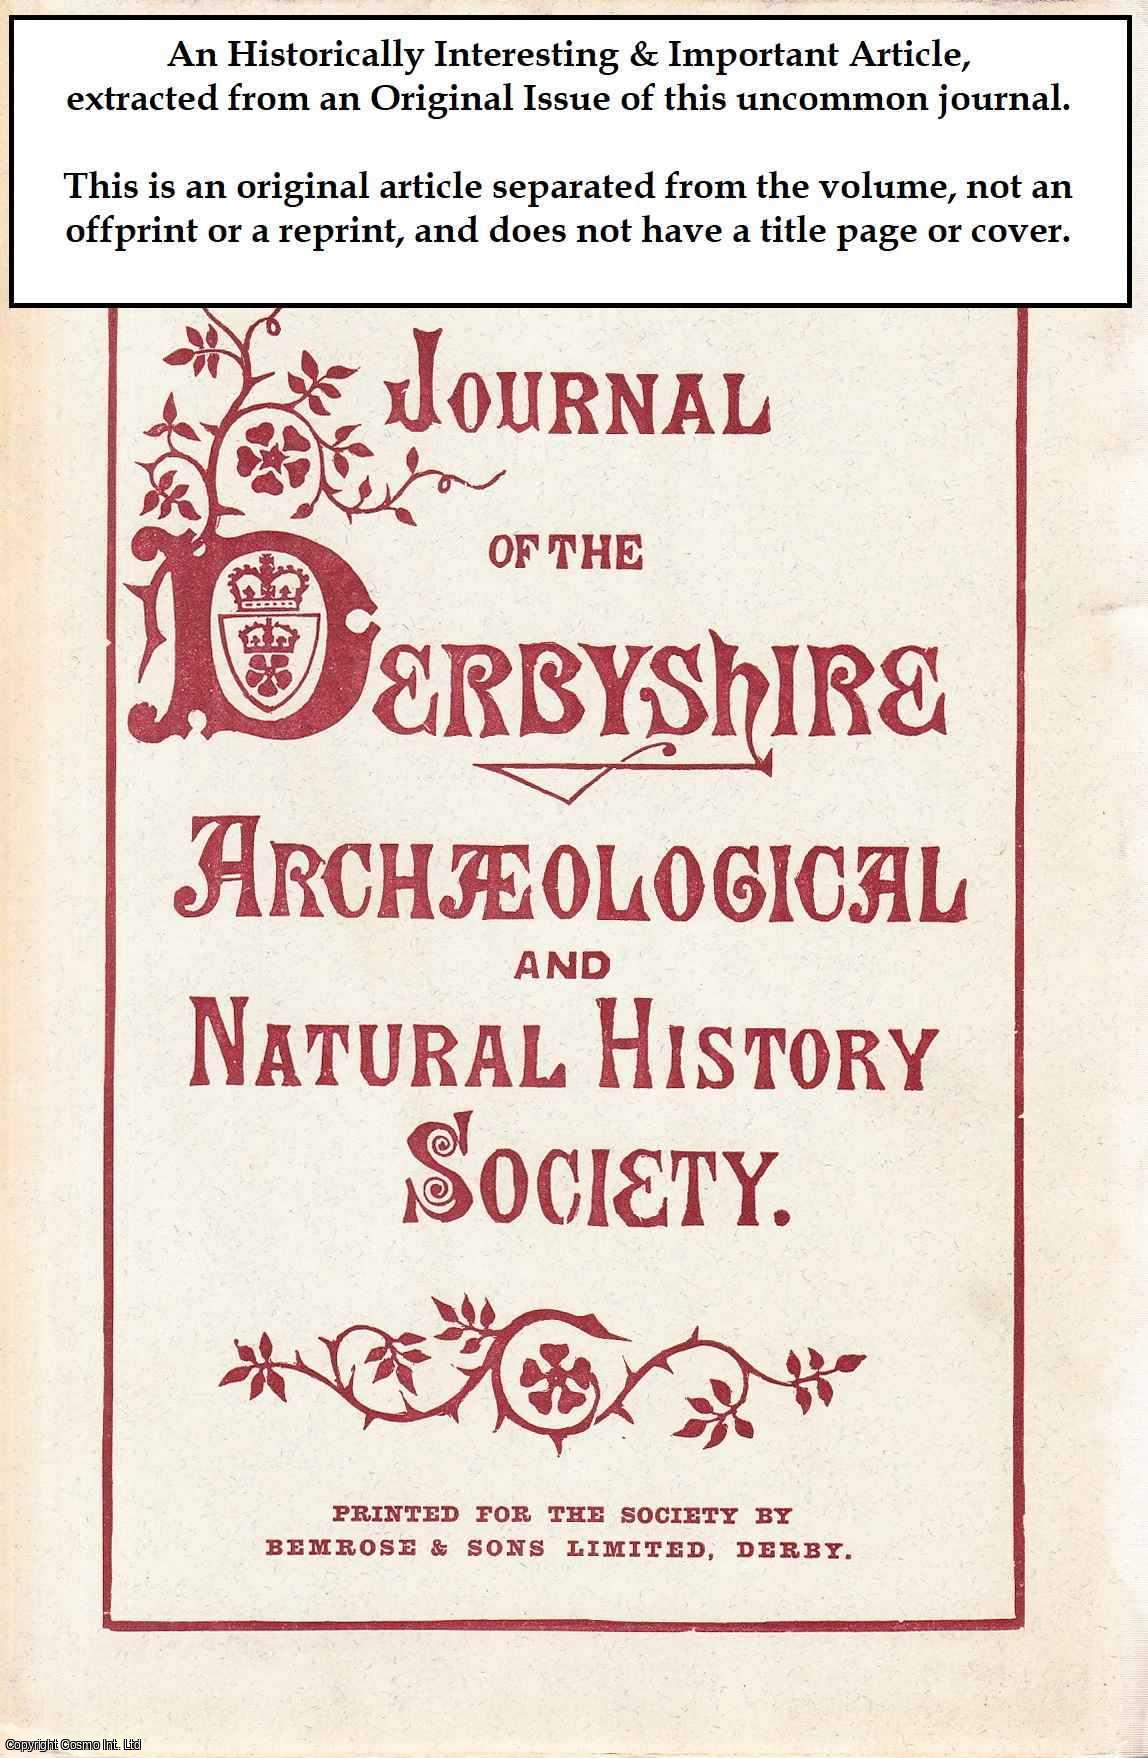 Francis C. R. Jourdain - The Chantries Founded iin the Parish Church of Ashburne, Co. Derby. An original article from the Journal of the Derbyshire Archaeological & Natural History Society, 1892.